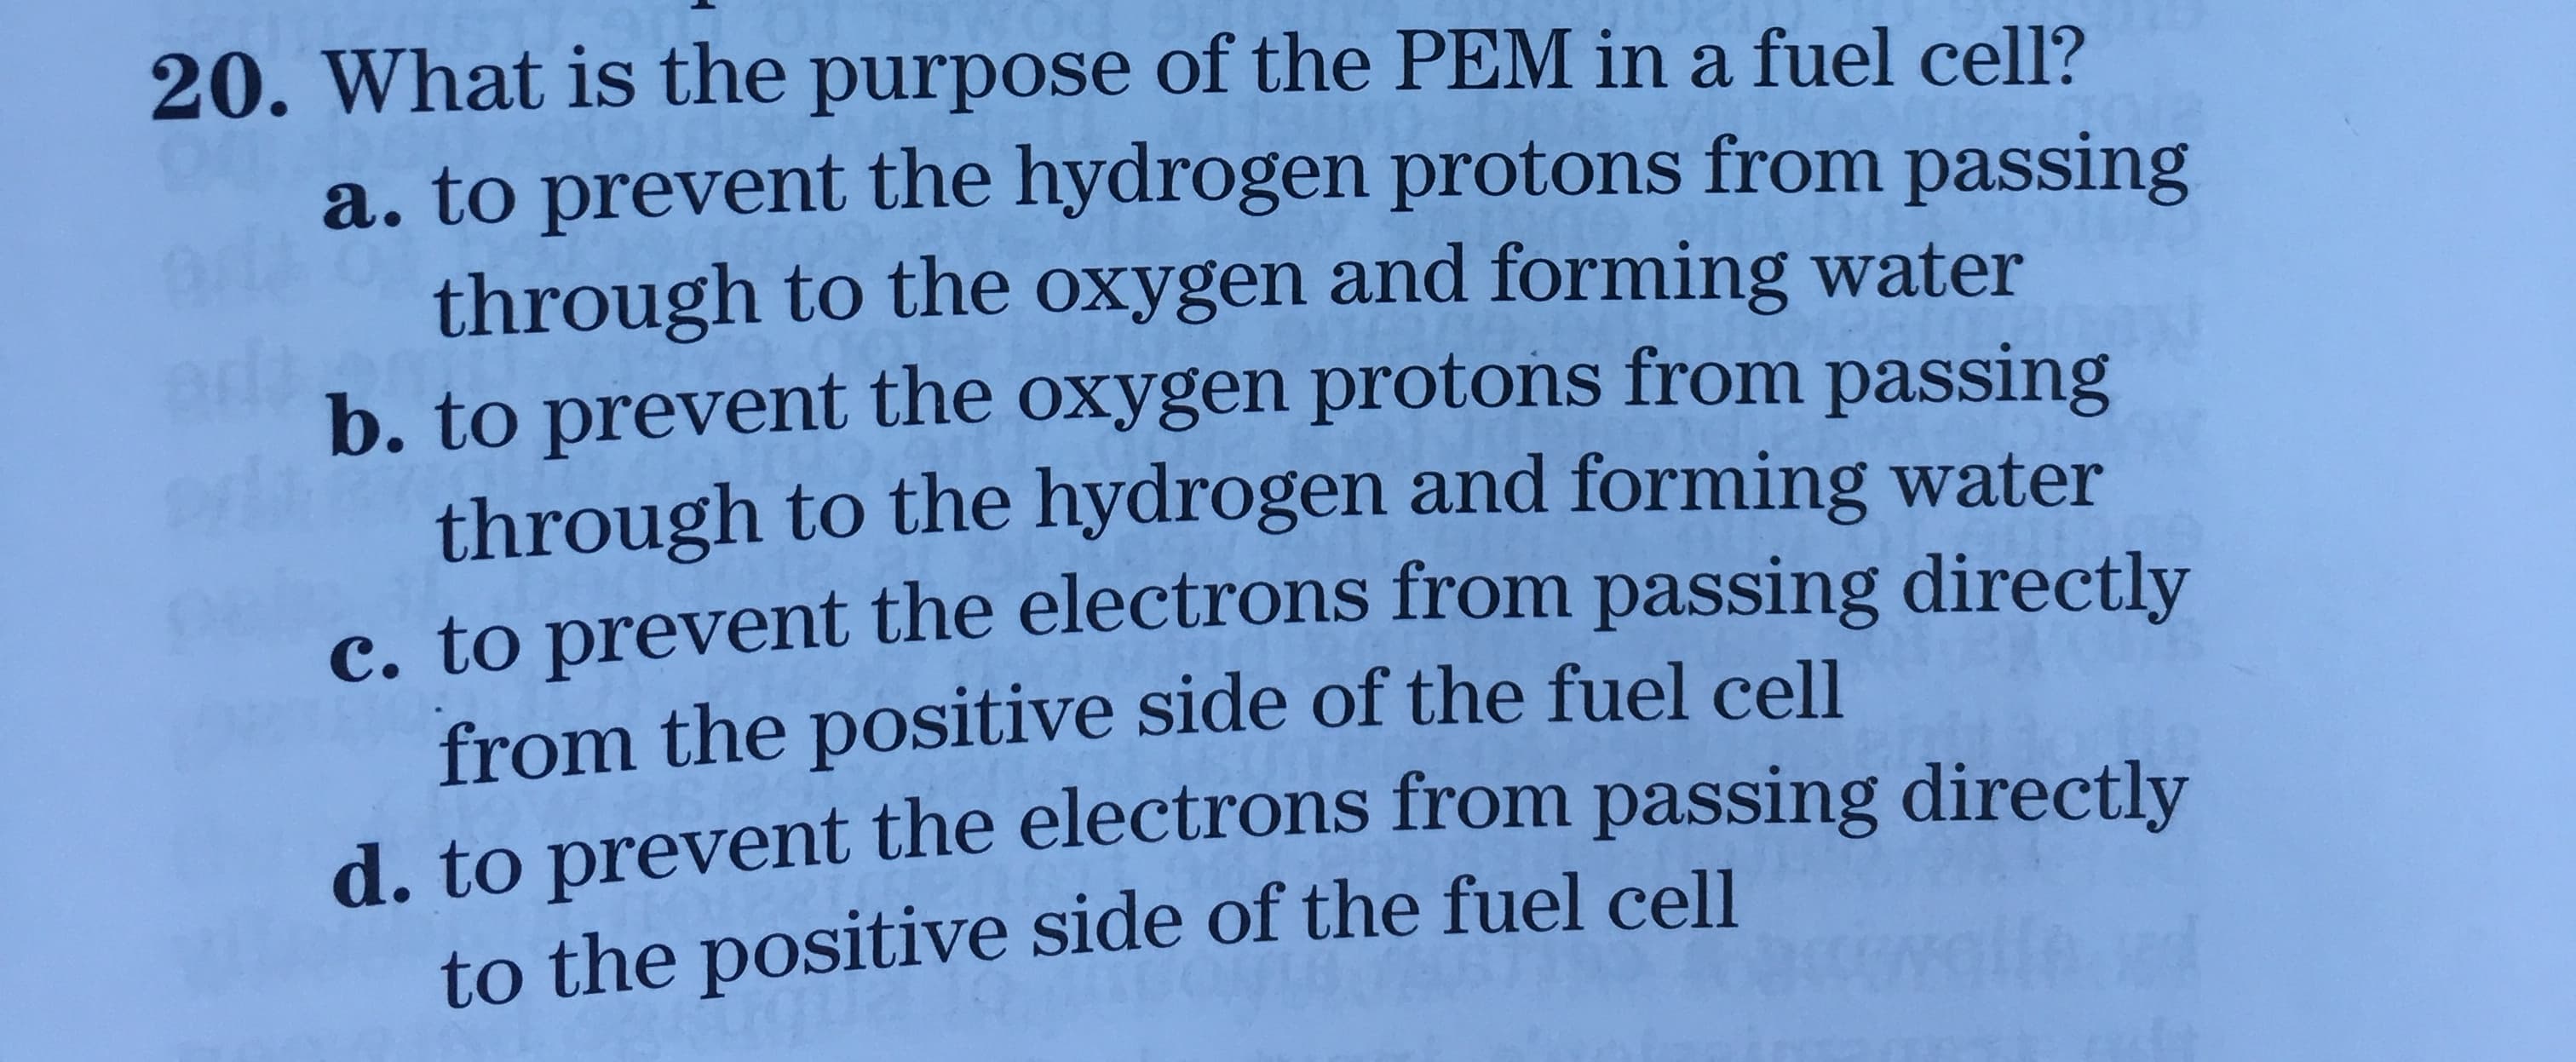 20. What is the purpose of the PEM in a fuel cell?
a. to prevent the hydrogen protons from passing
through to the oxygen and forming water
b. to prevent the oxygen protons from passing
through to the hydrogen and forming water
c. to prevent the electrons from passing directly
from the positive side of the fuel cell
d. to prevent the electrons from passing directly
to the positive side of the fuel cell
